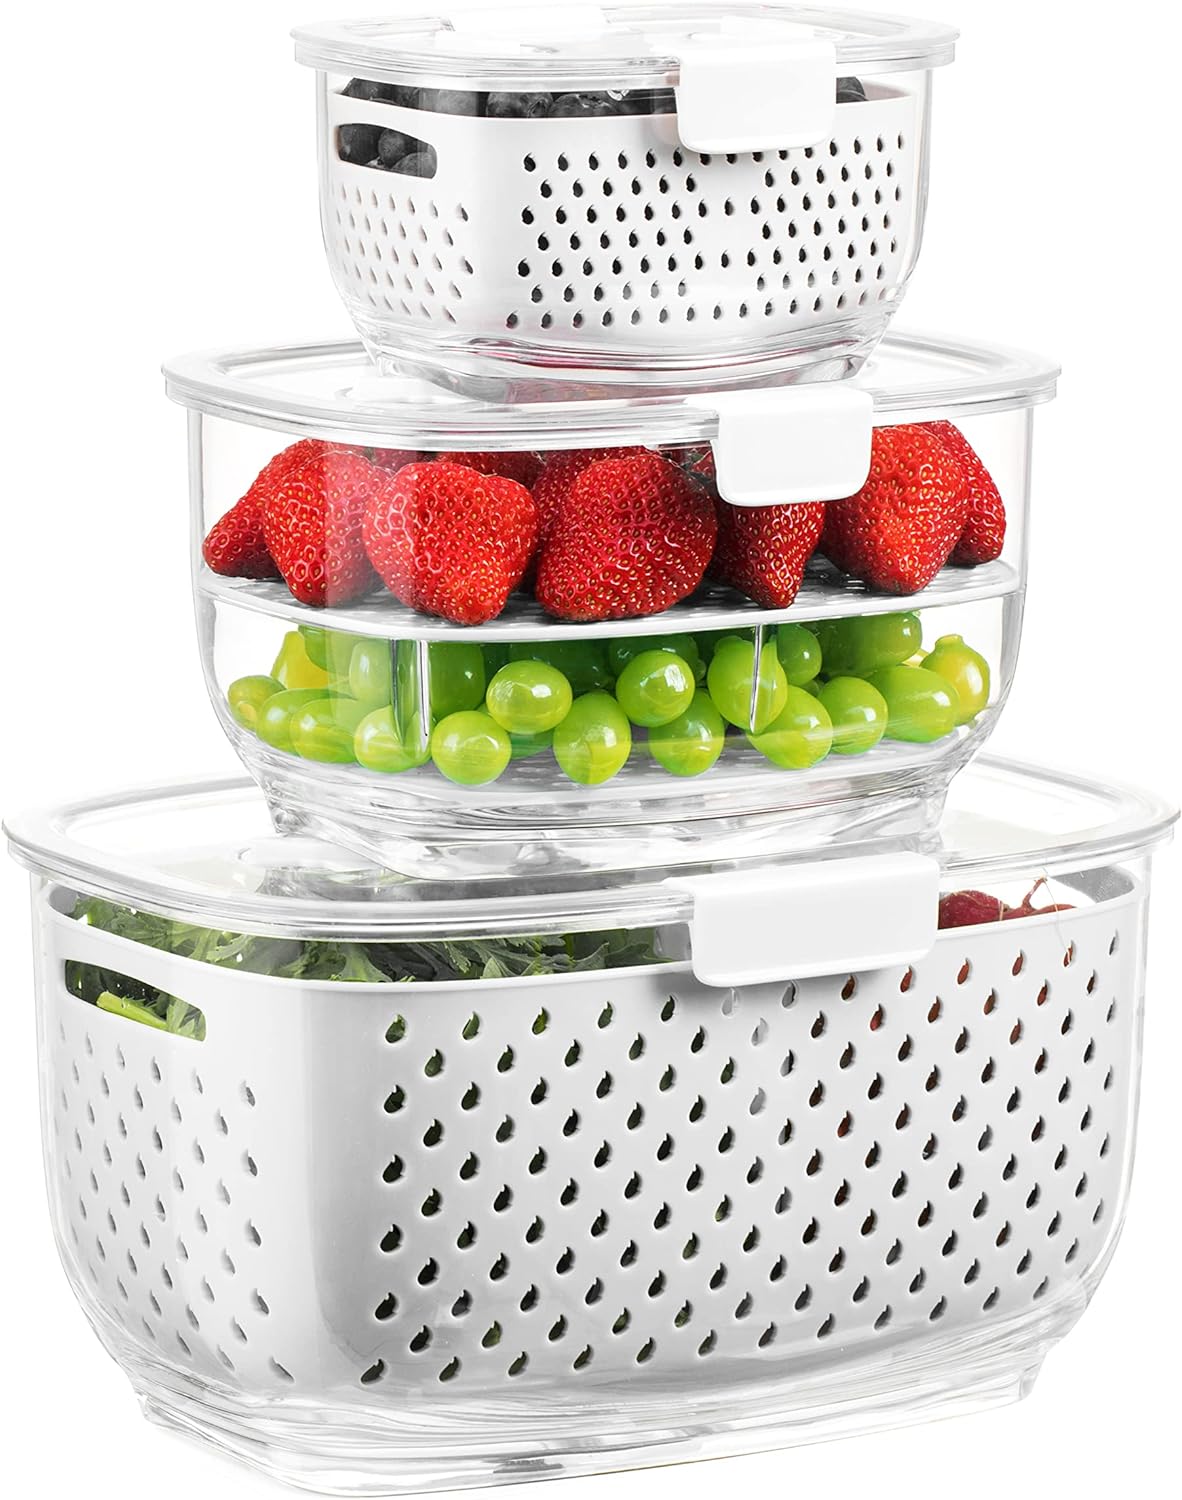 LUXEAR Fresh Produce Vegetable Fruit Storage Containers 3Piece Set, BPA-free, Partitioned Salad Container, Fridge Organizers, Used in Storing Fruits Vegetables, White